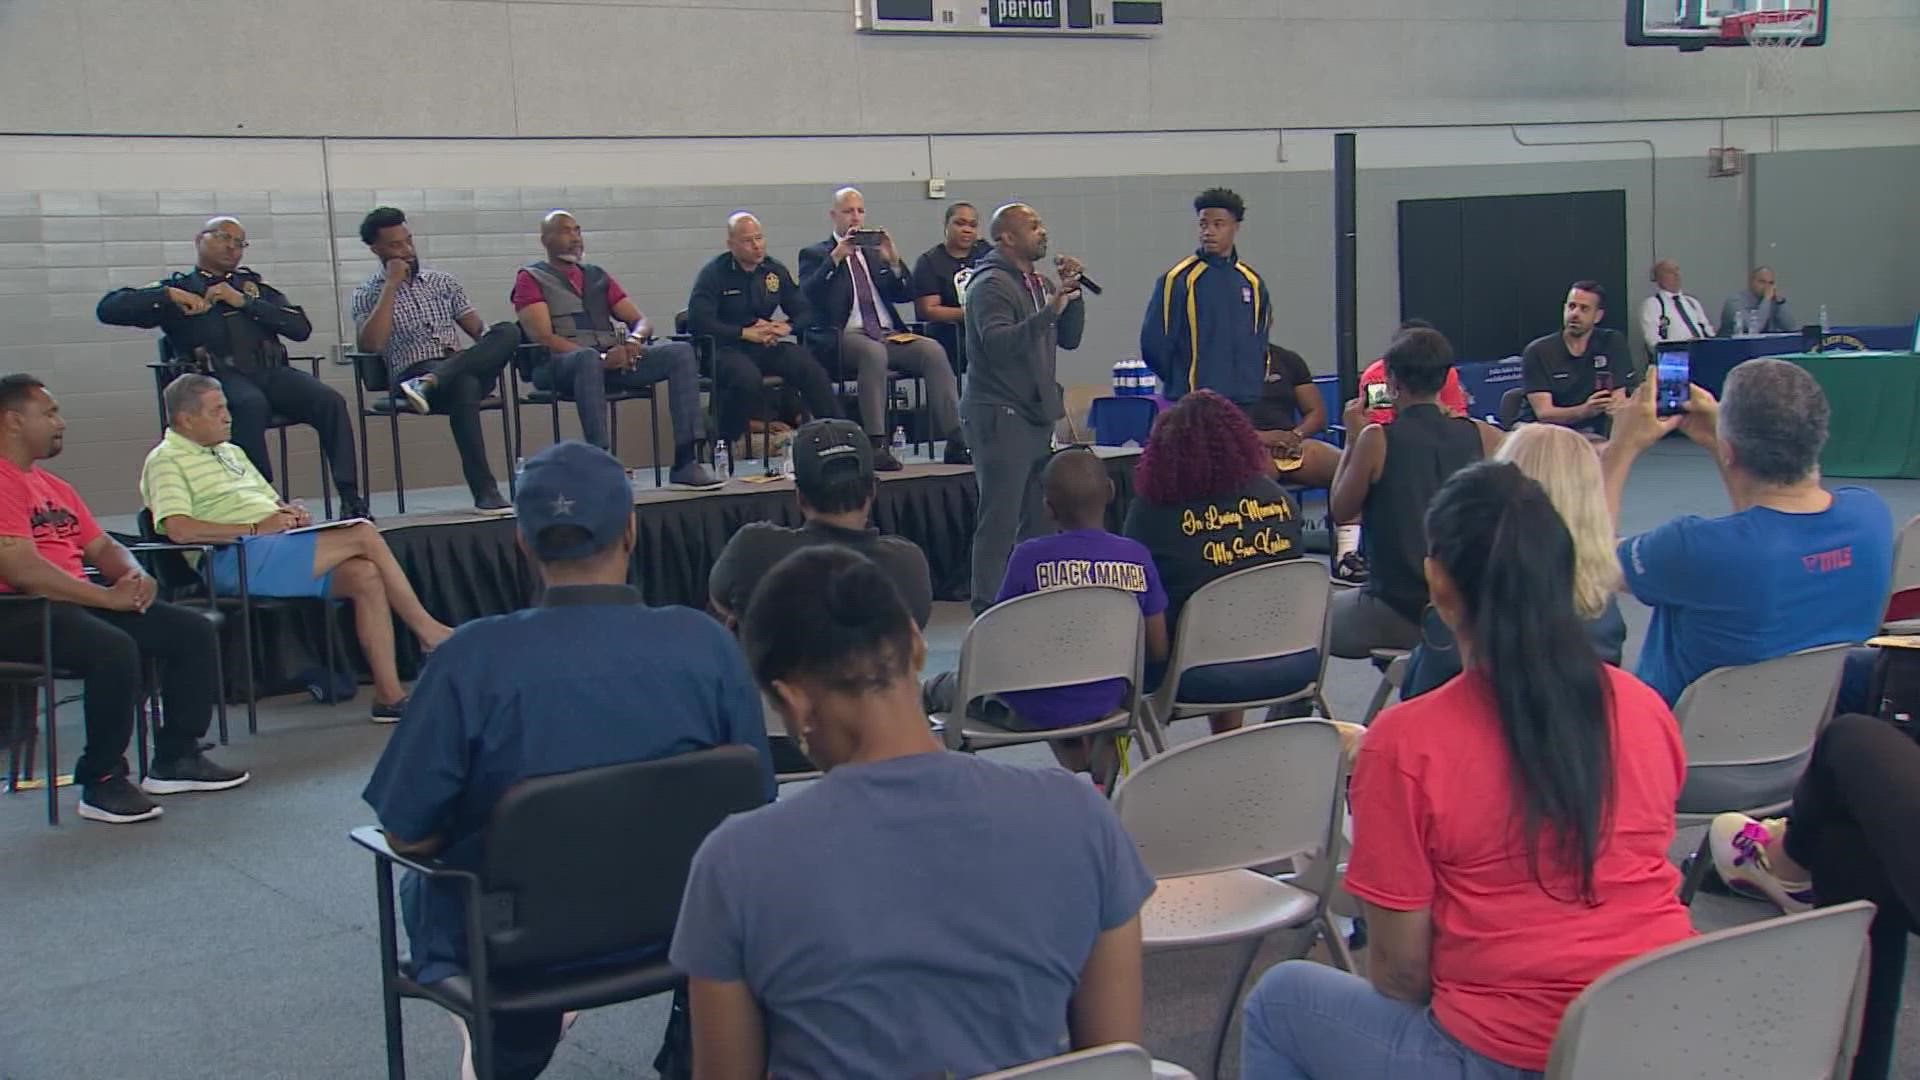 Dallas police hosted a town hall event to have an open discussion about recent violence in the city and provide potential positive outlets for the community.